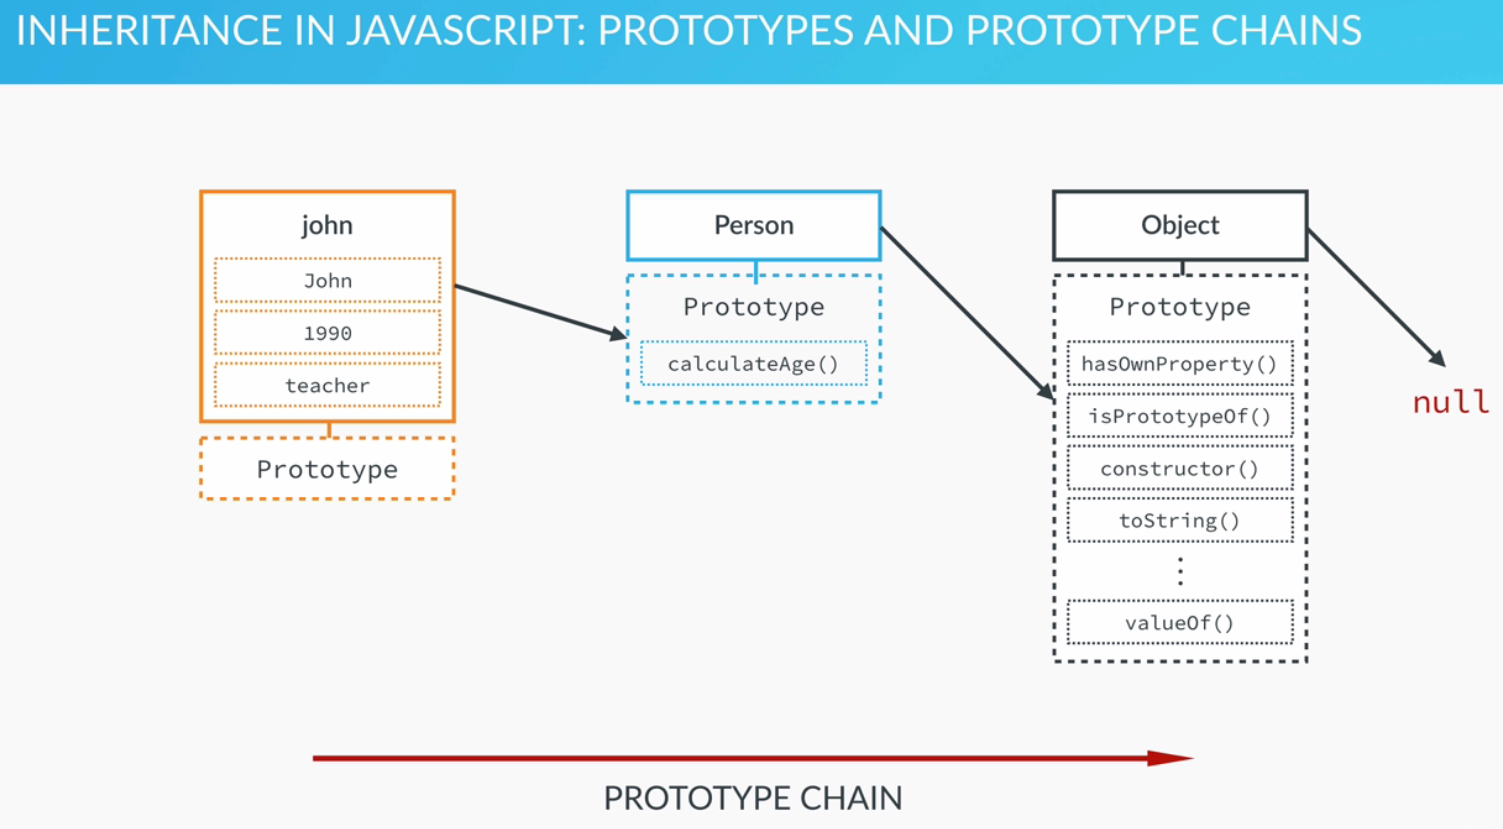 Inheritance in JavaScript: Prototypes and Prototype Chains